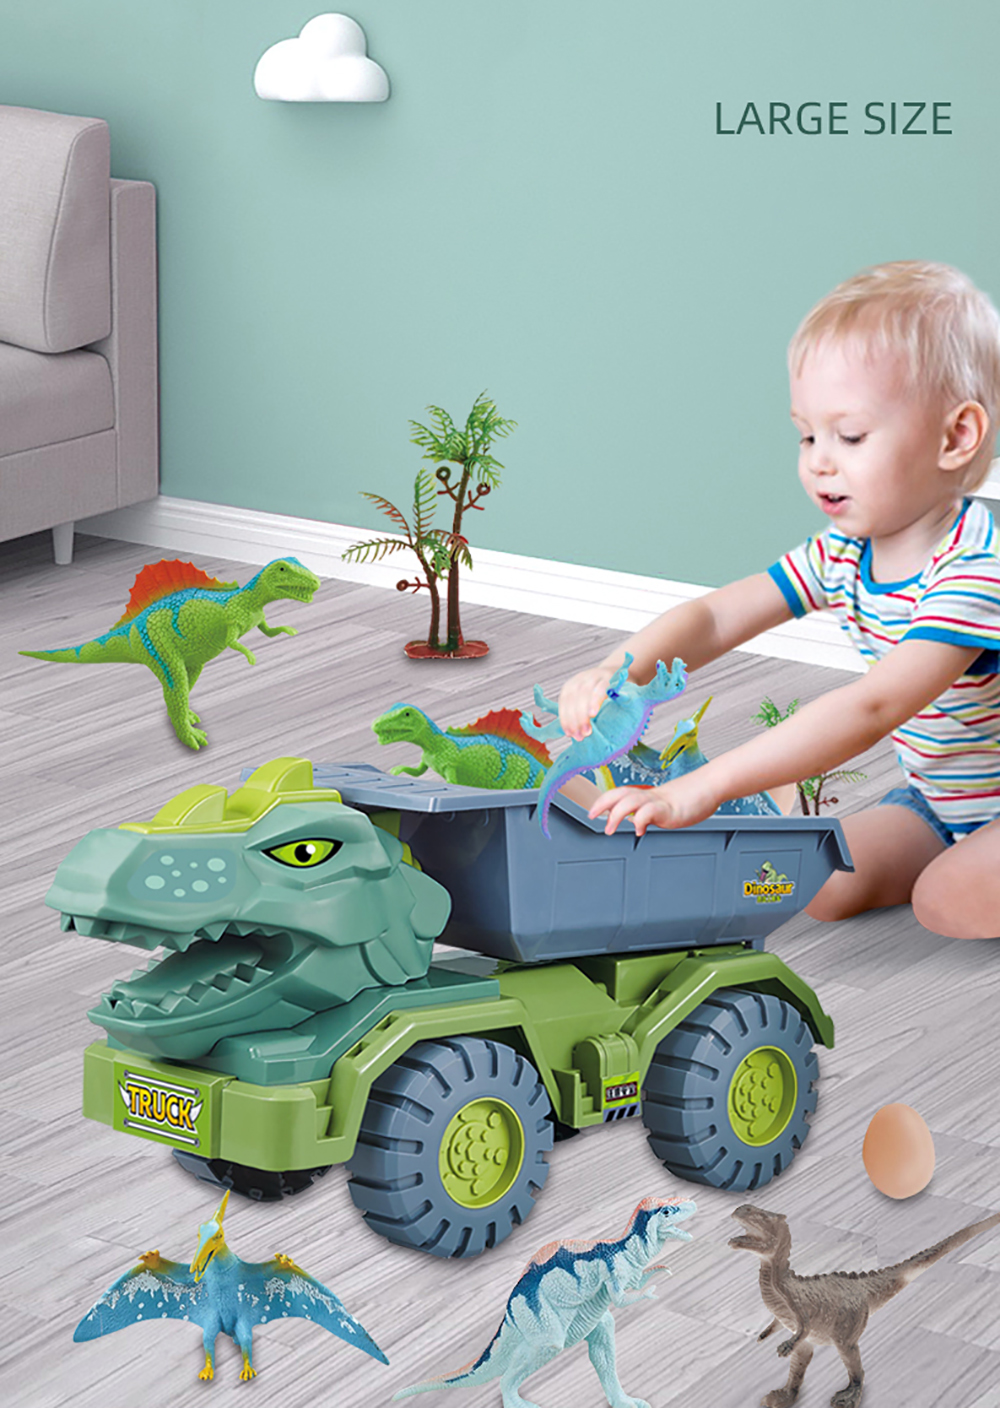 New-Style-Children-Dinosaur-Transport-Car-Inertial-Cars-Carrier-Truck-Toy-Pull-Back-Vehicle-Toy-with-1902704-3